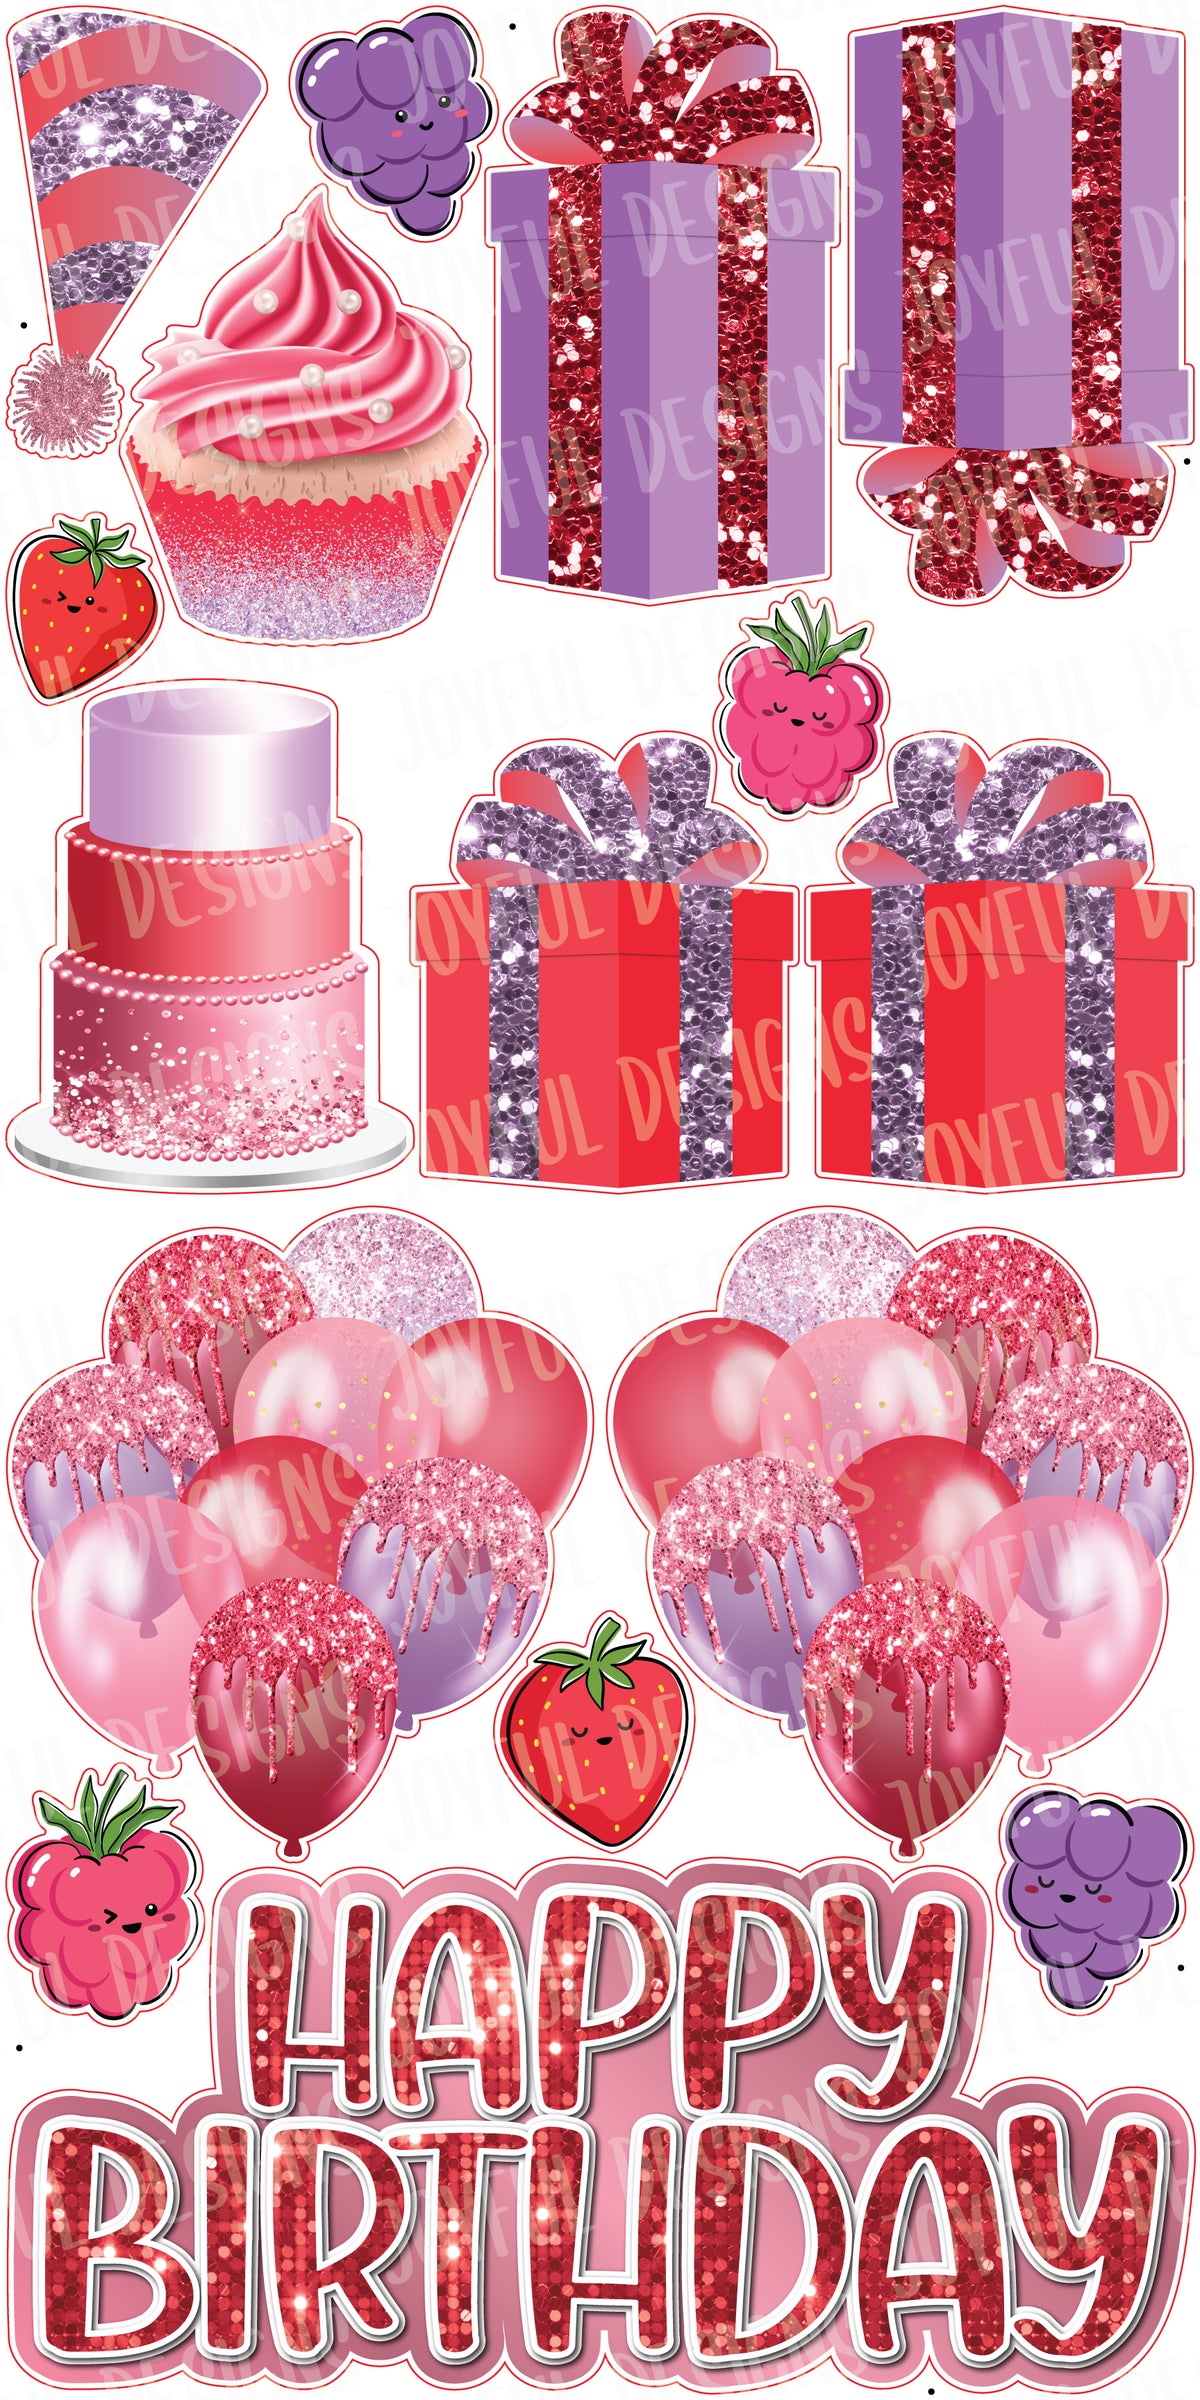 Berry Sweet "One and Done" Birthday Centerpiece & Flair Set